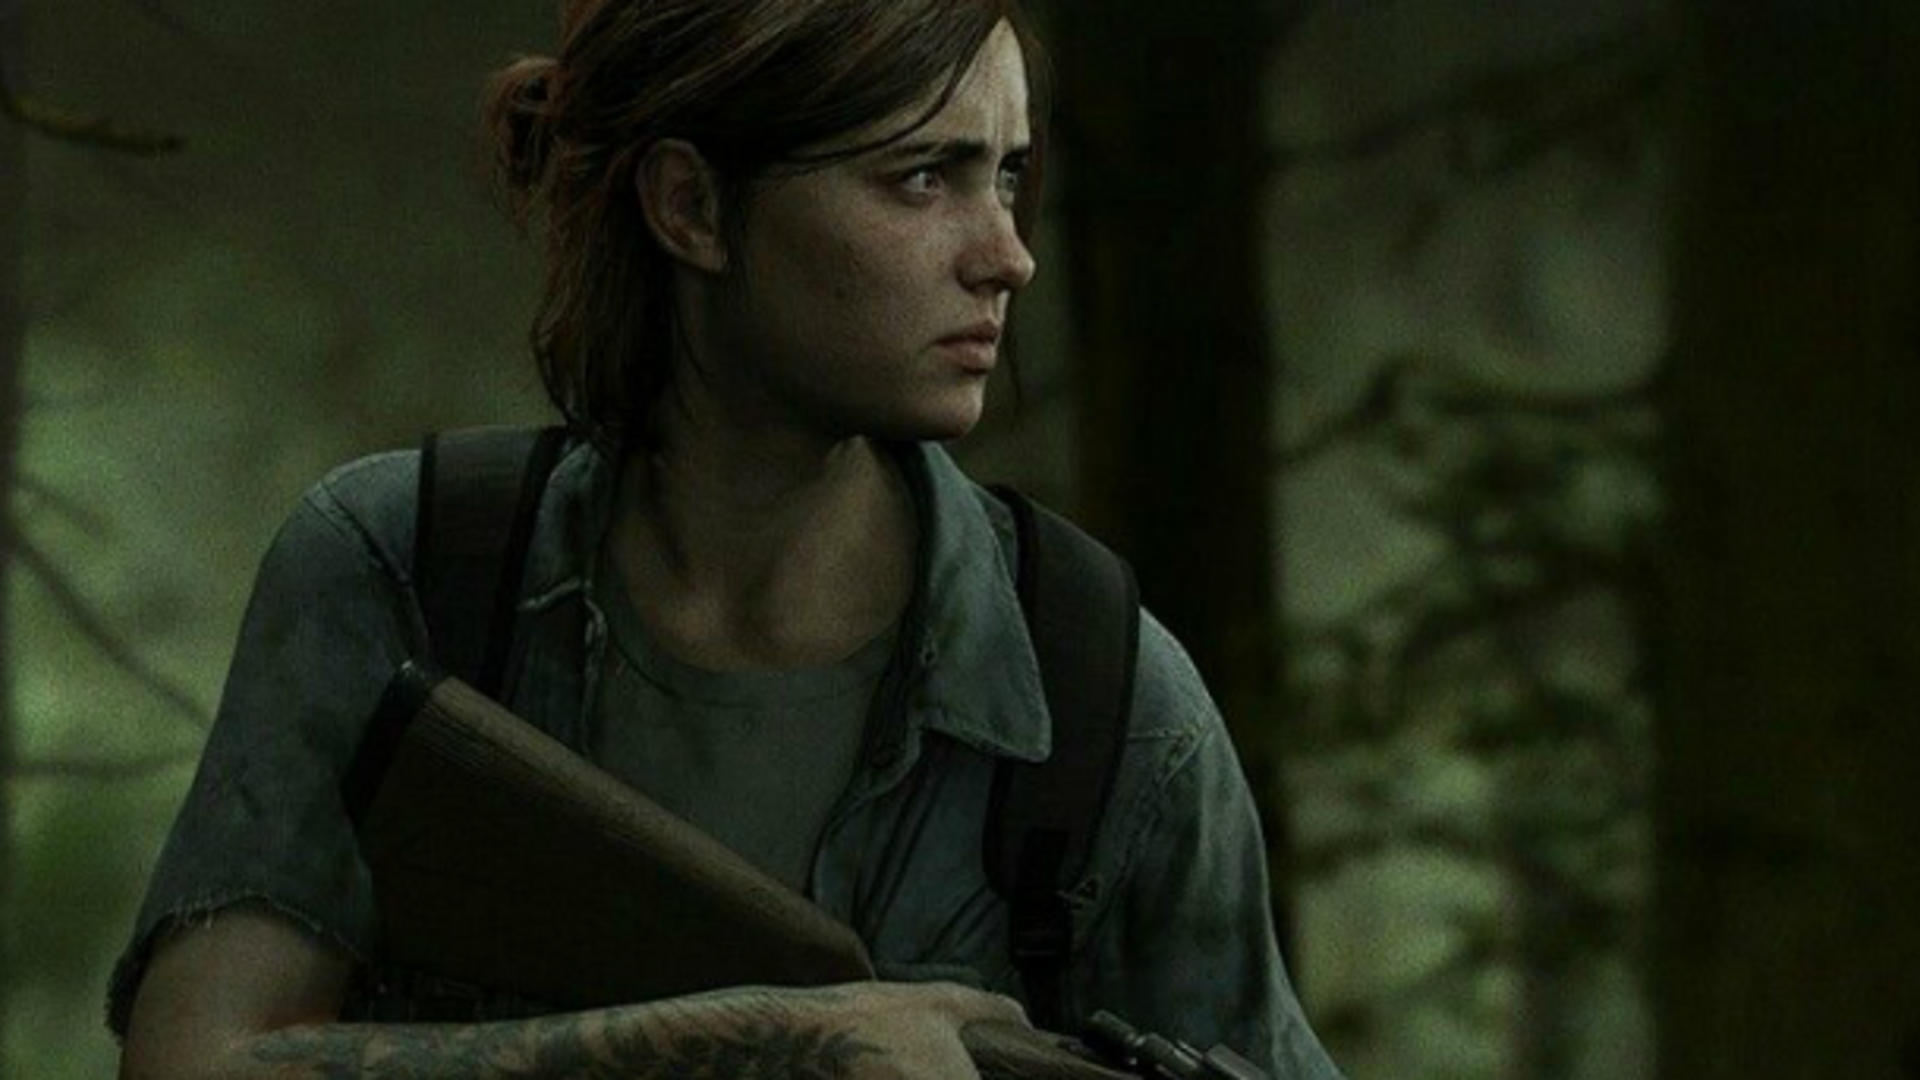 last of us 2, last of us 2 release, last of us 2 ps4, video game releases